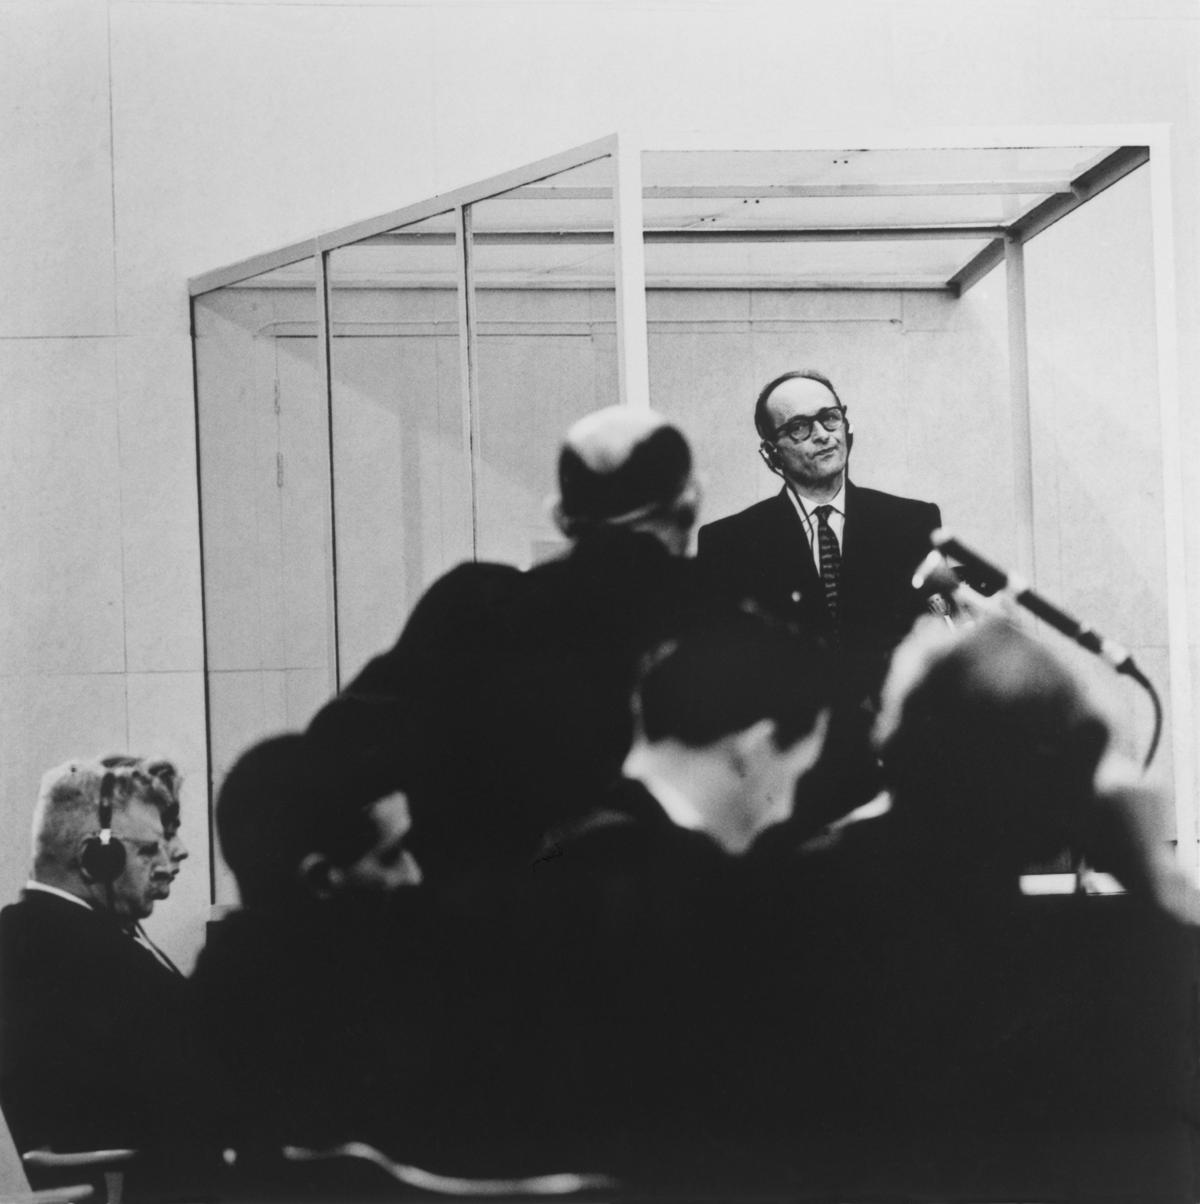 Eichmann, wearing glasses, a dark suit, and headphones, purses his lips at a lawyer in the foreground, who is questioning him, hands on his hips